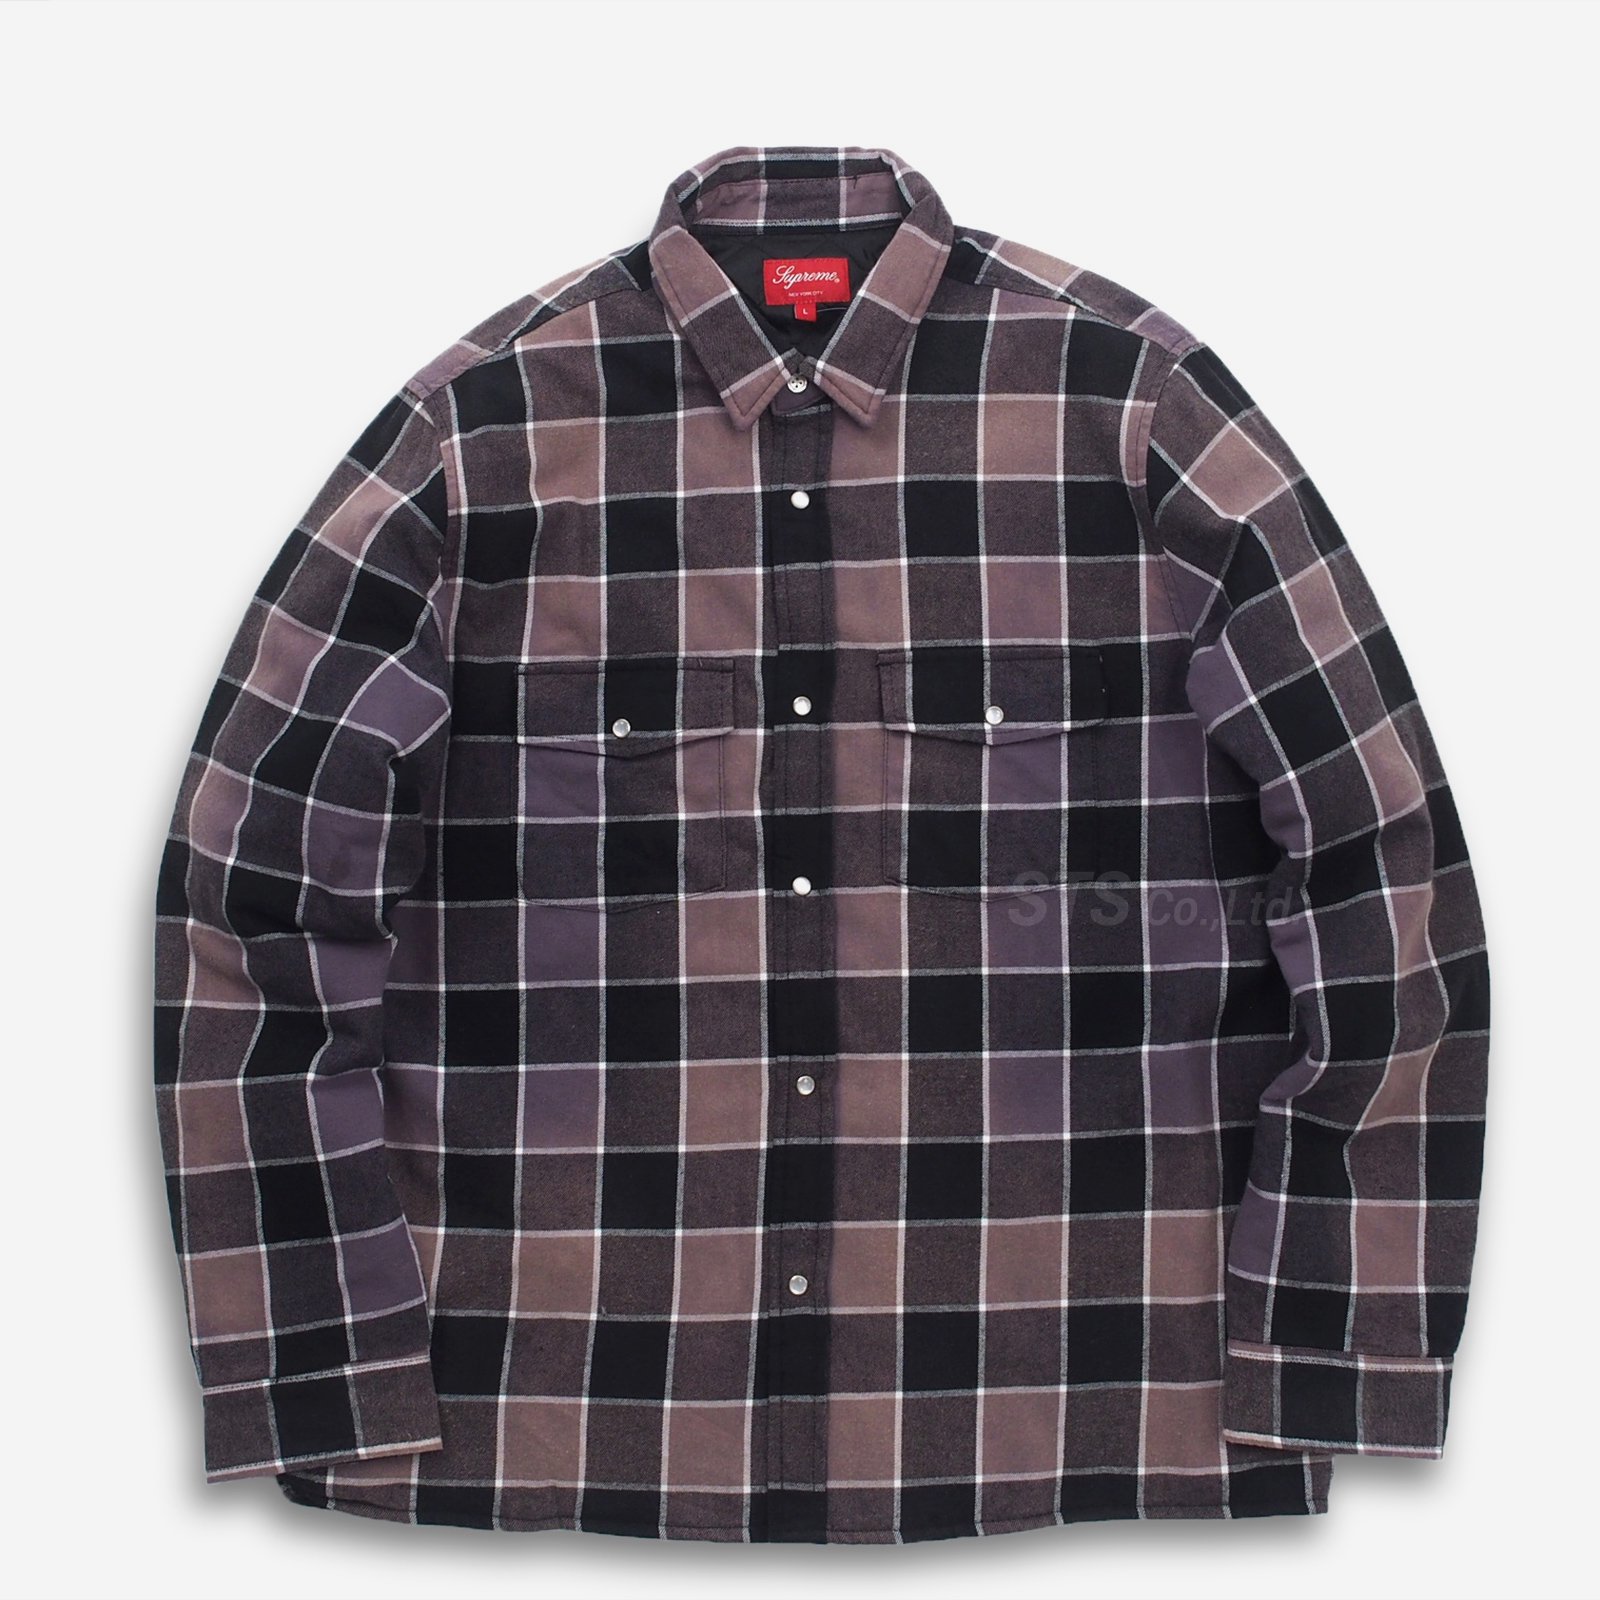 Supreme - Quilted Faded Plaid Shirt - ParkSIDER